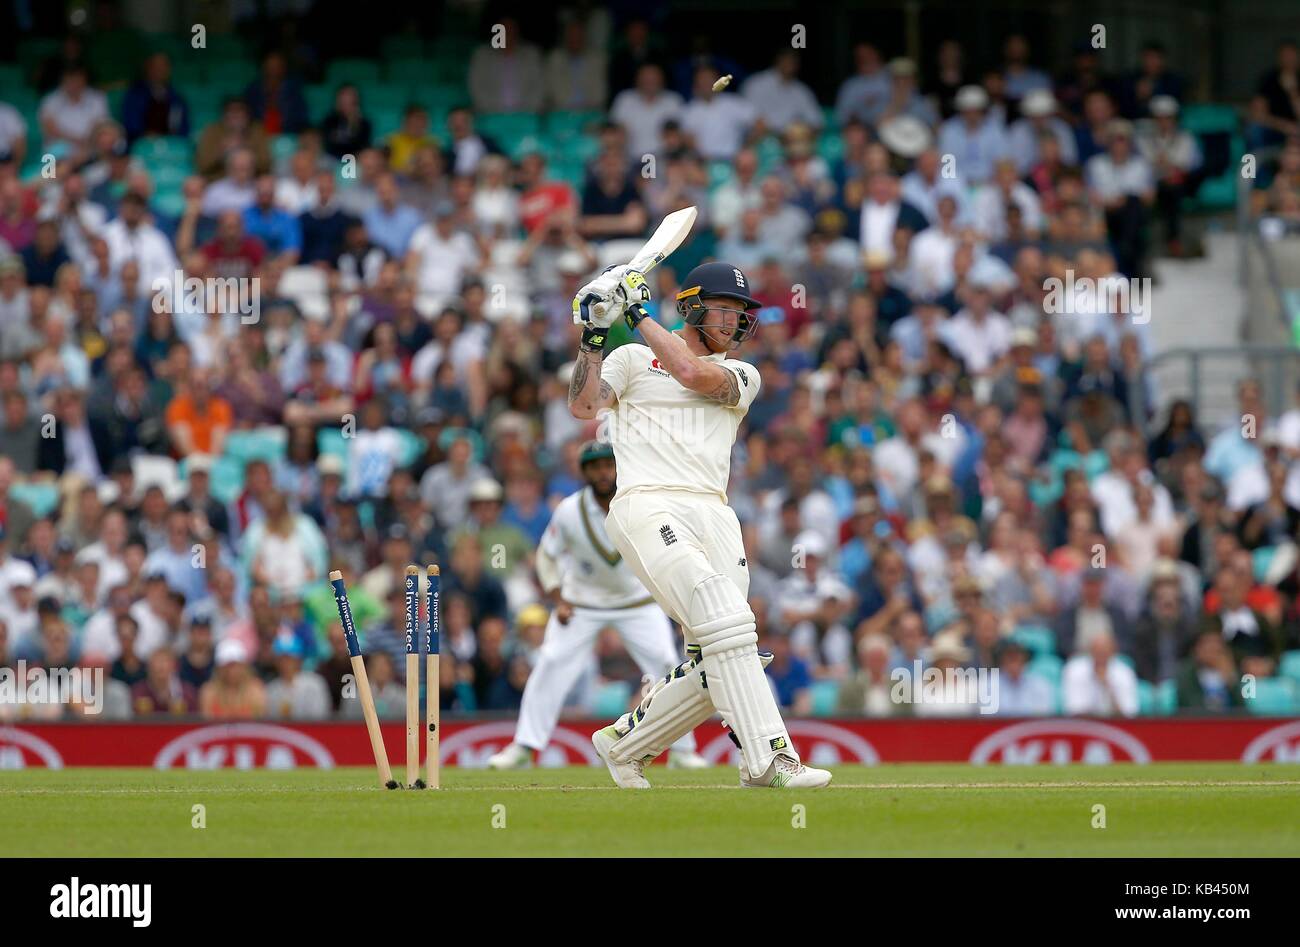 Ben Stokes of England is bowled during day four of the third Investec Test match between England and South Africa at The Oval in London. 30 Jul 2017 Stock Photo